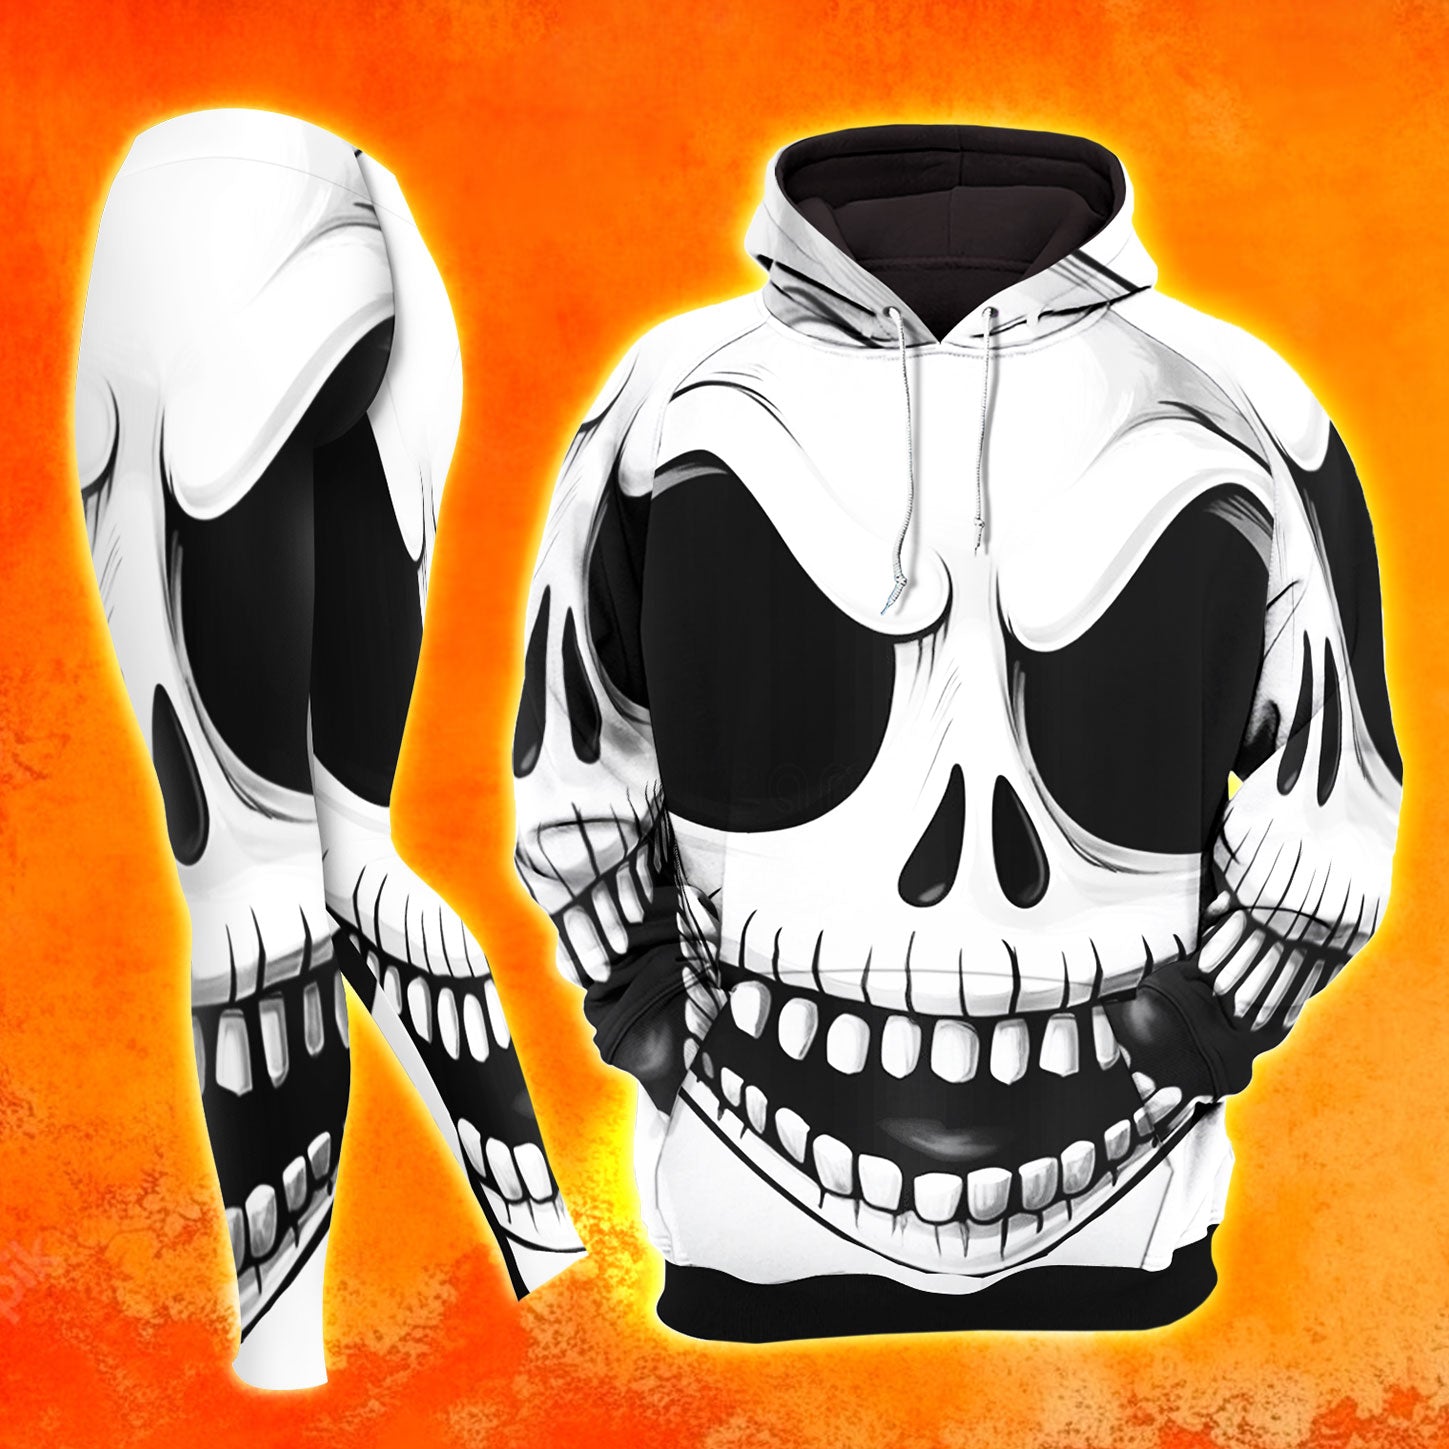 Nightmare Silver Art Combo Hoodie and Leggings - Dark and edgy matching set with skull designs for a unique and stylish look.